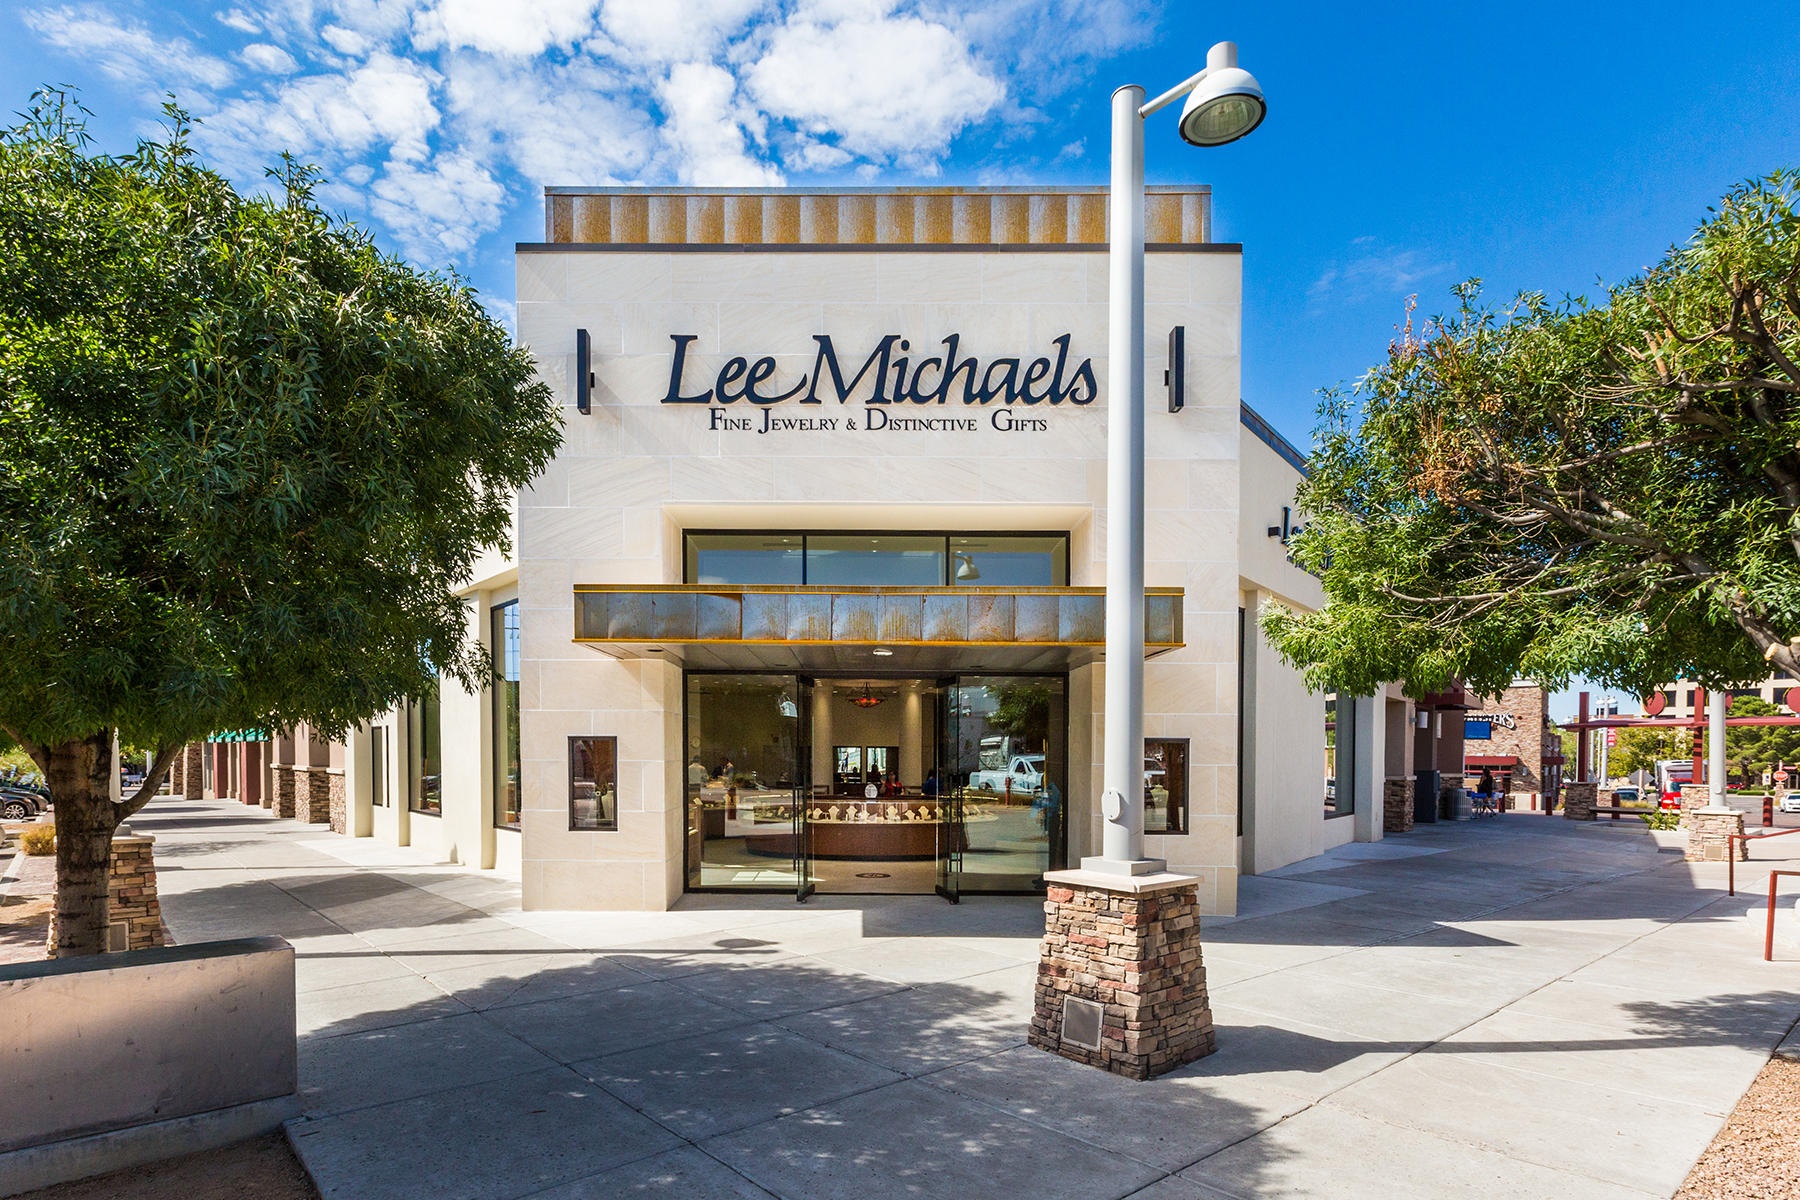 Visit Lee Michaels Fine Jewelry store in Albuquerque, New Mexico.